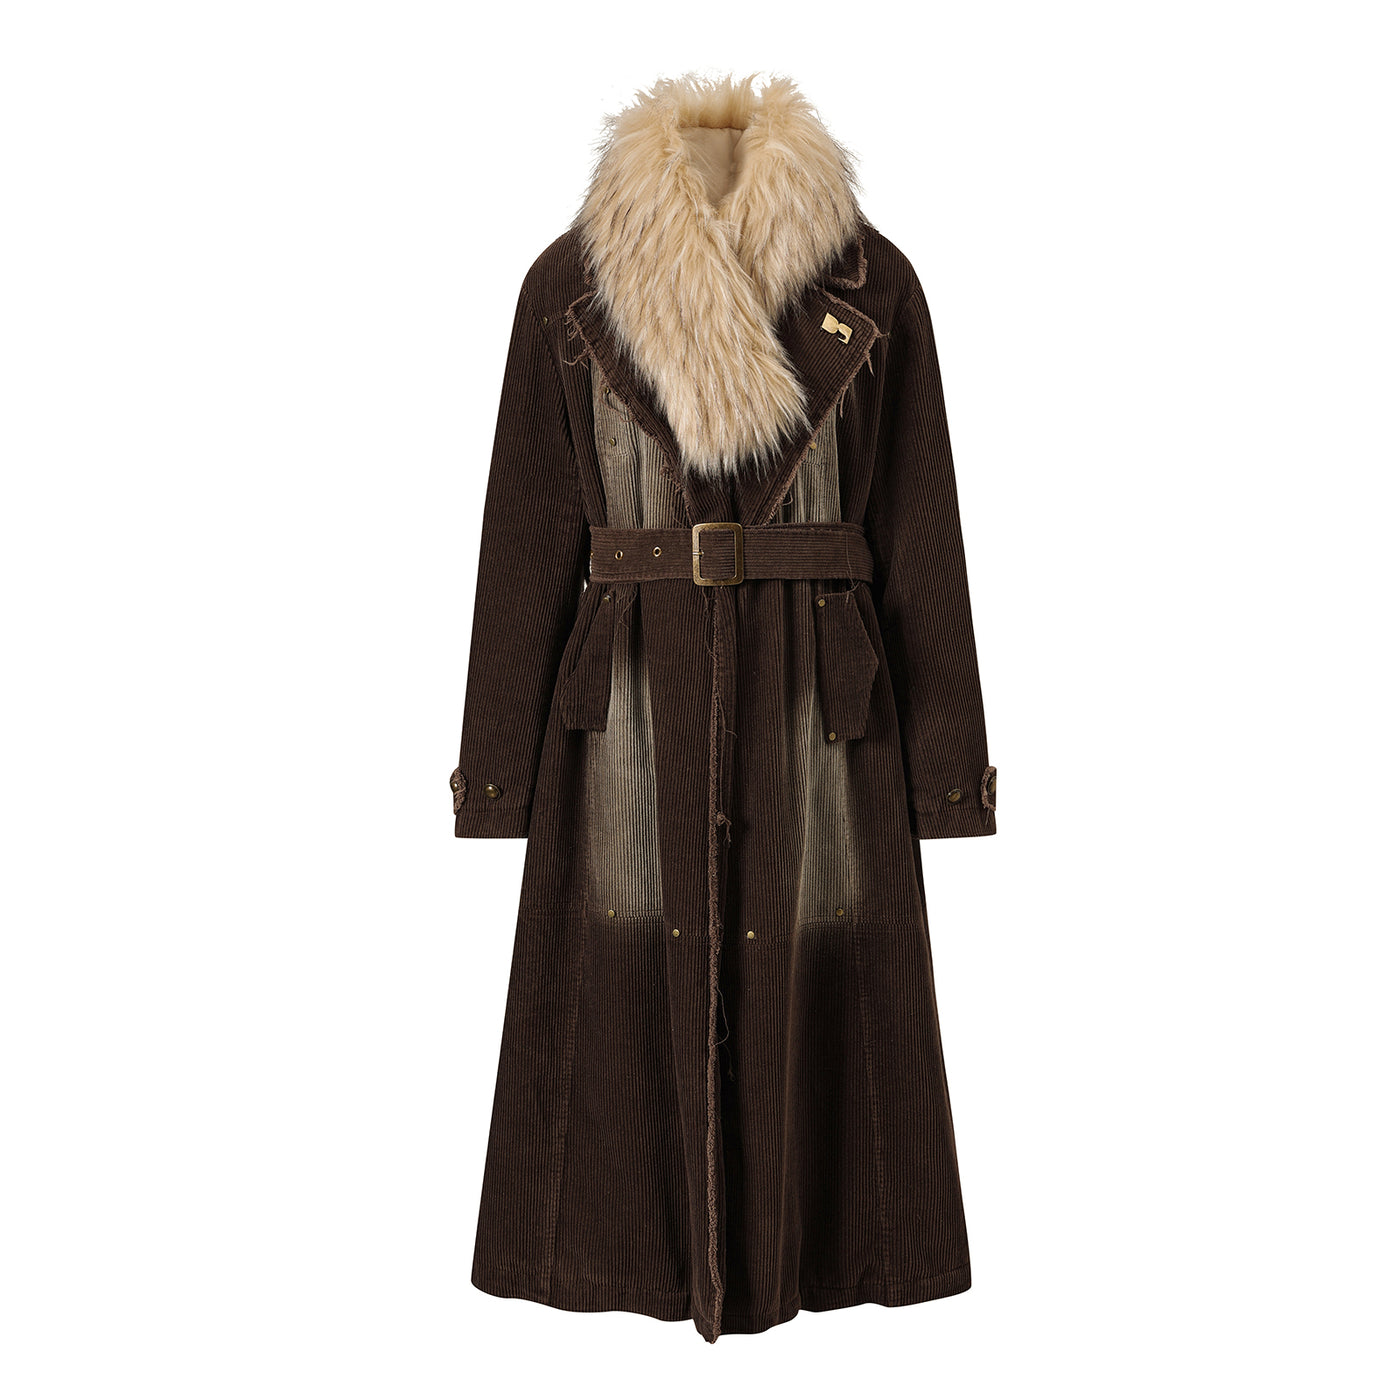 Removable fur set quilted warm coat DPR0014